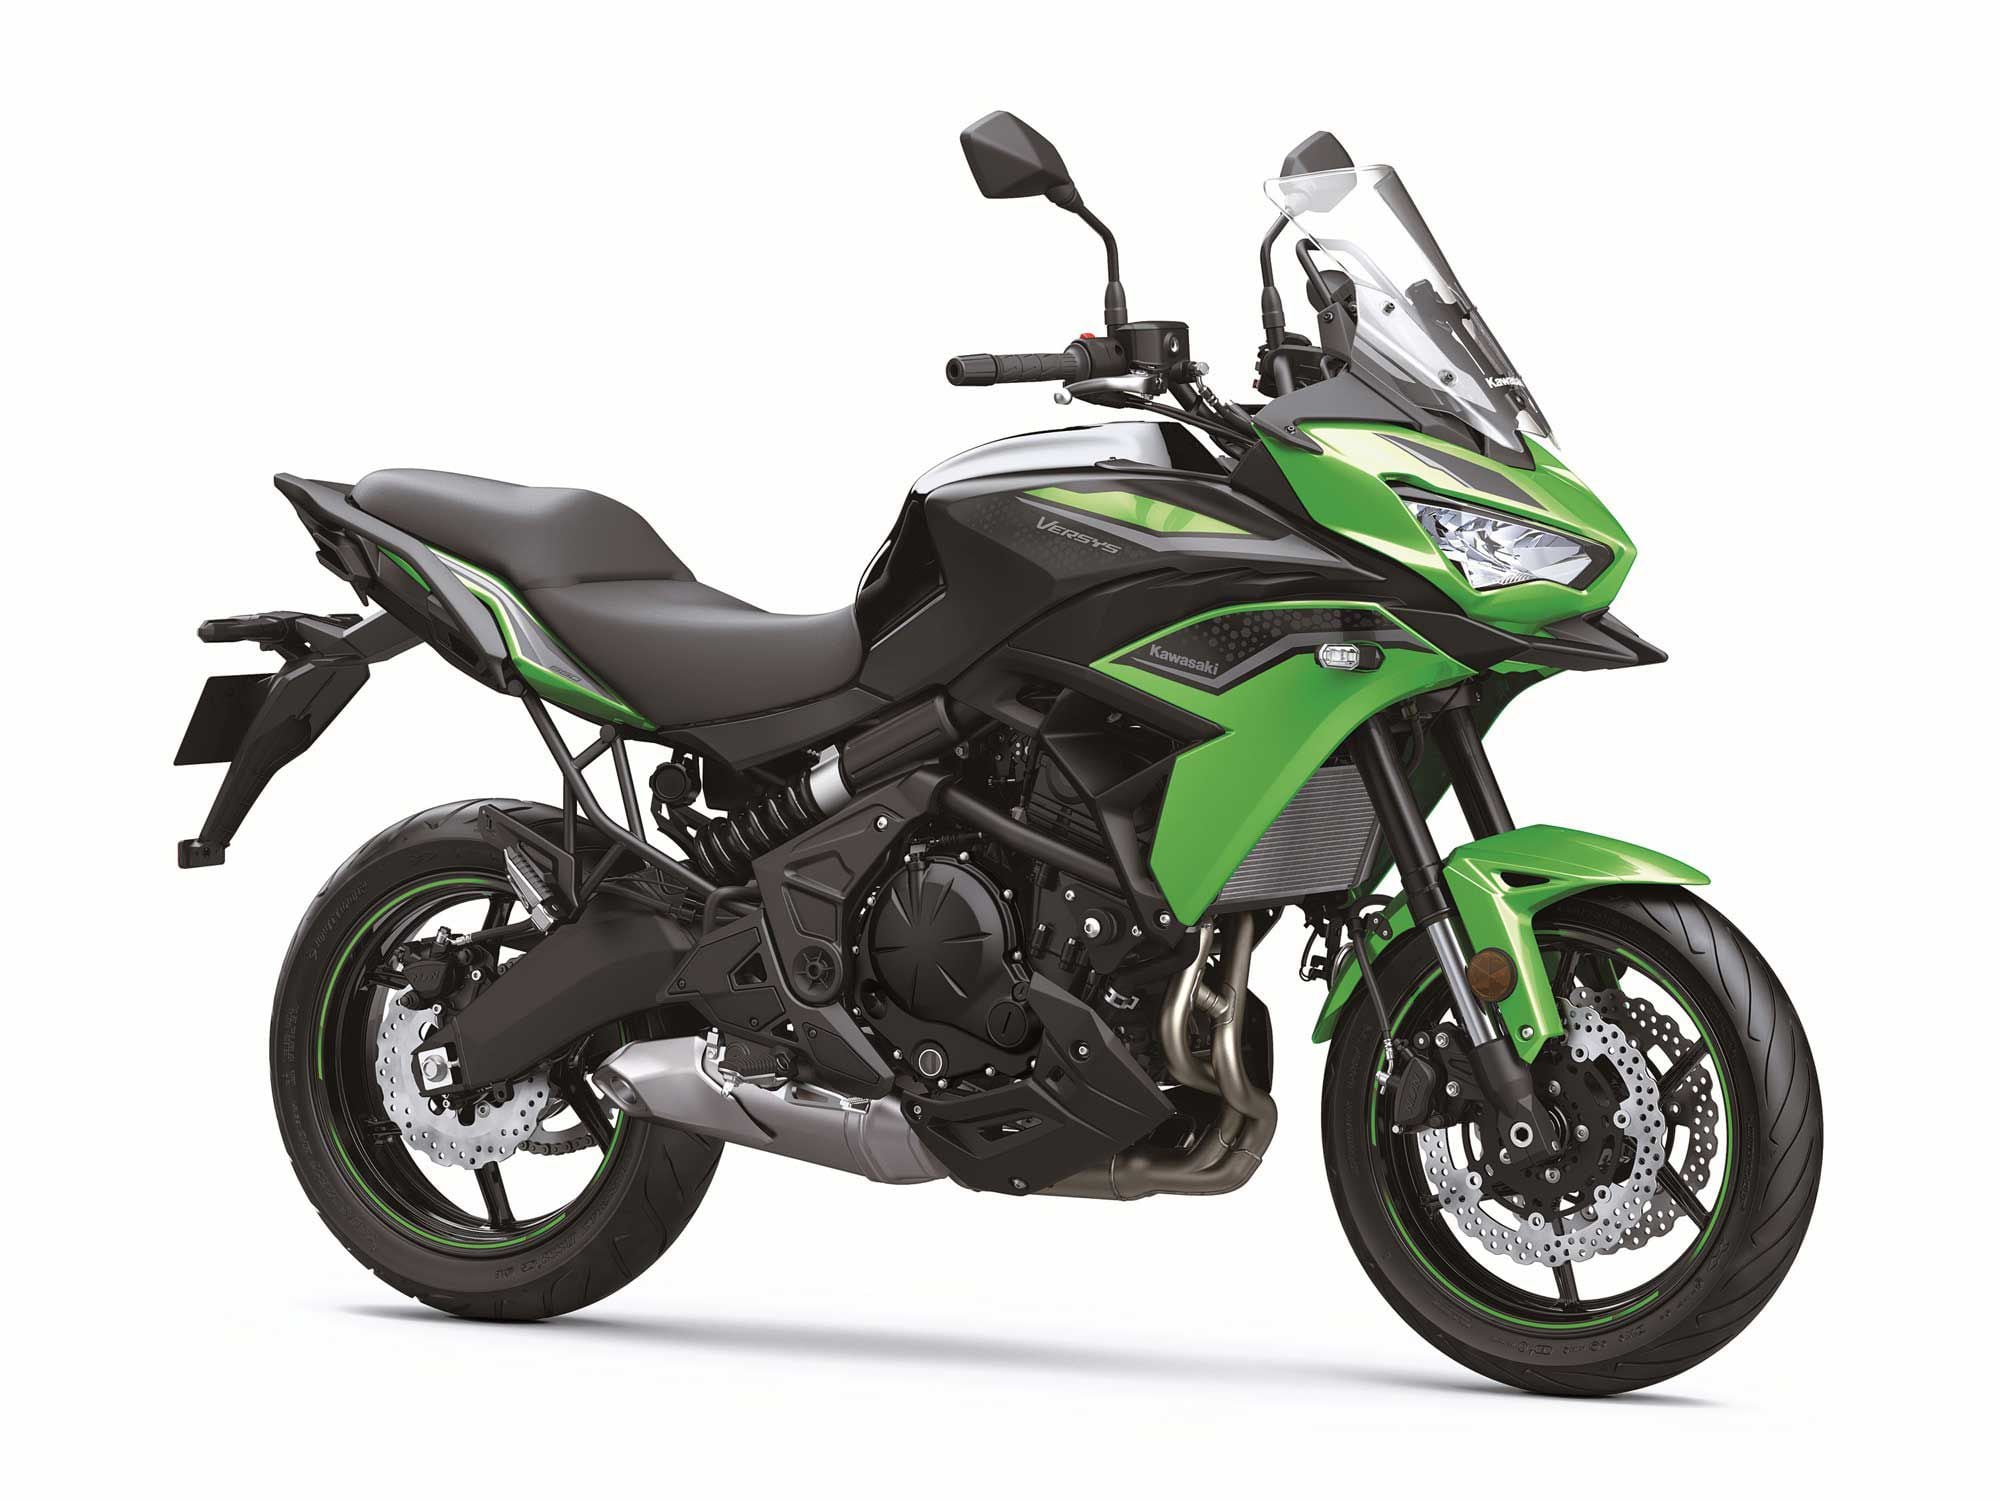 The second-generation Kawasaki Versys 650 gets sharper styling up front to match its Versys 1000 brethren, along with a few tech upgrades.